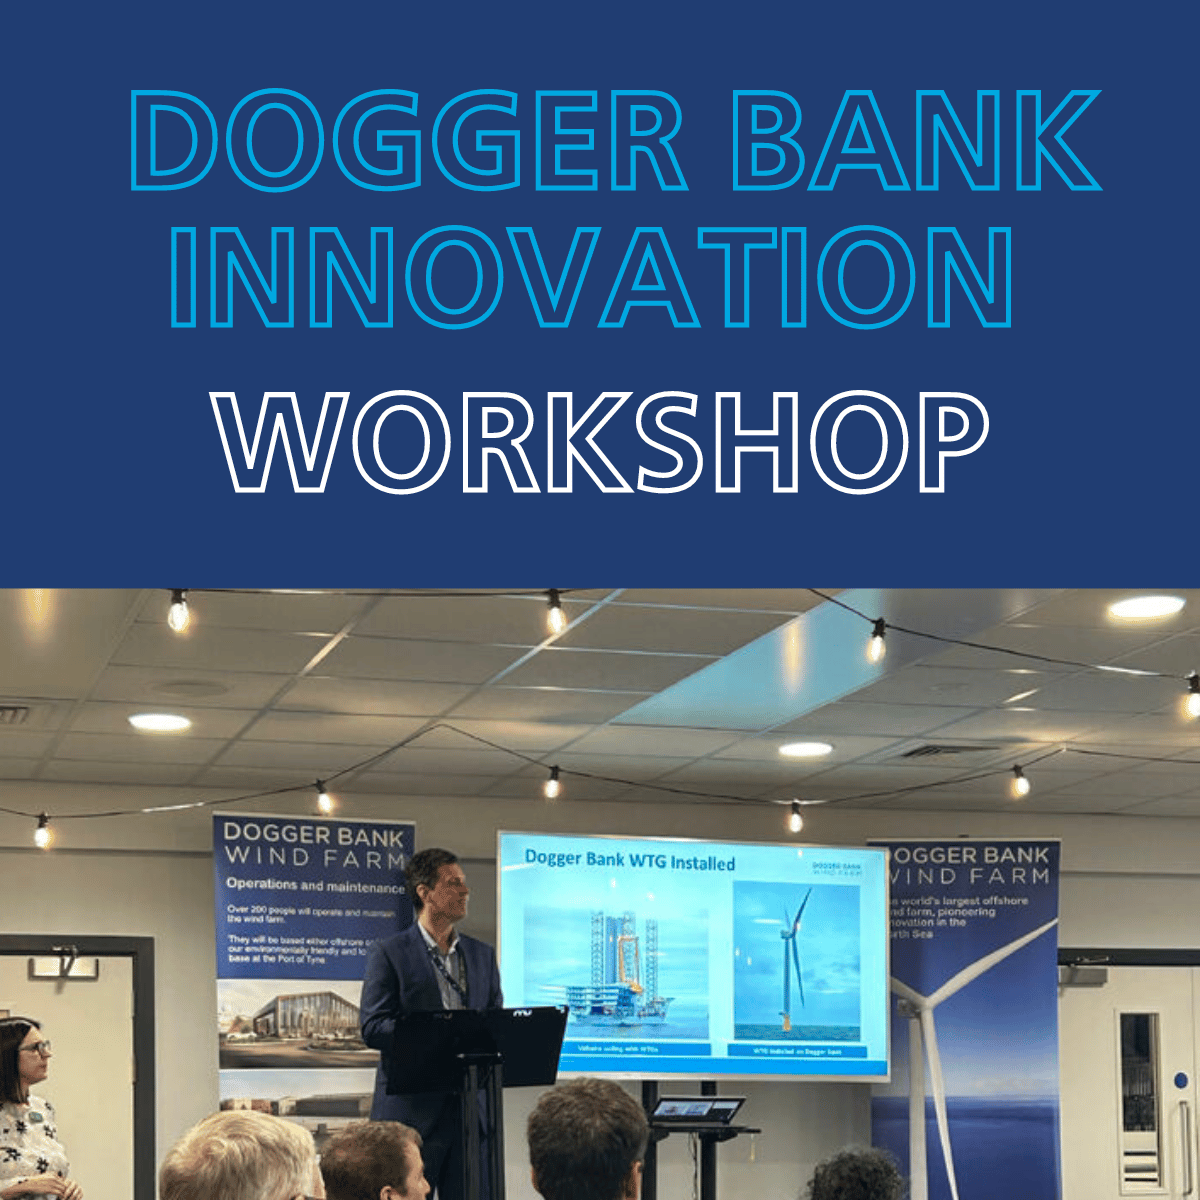 Eemits at the Dogger Bank Innovation Workshop